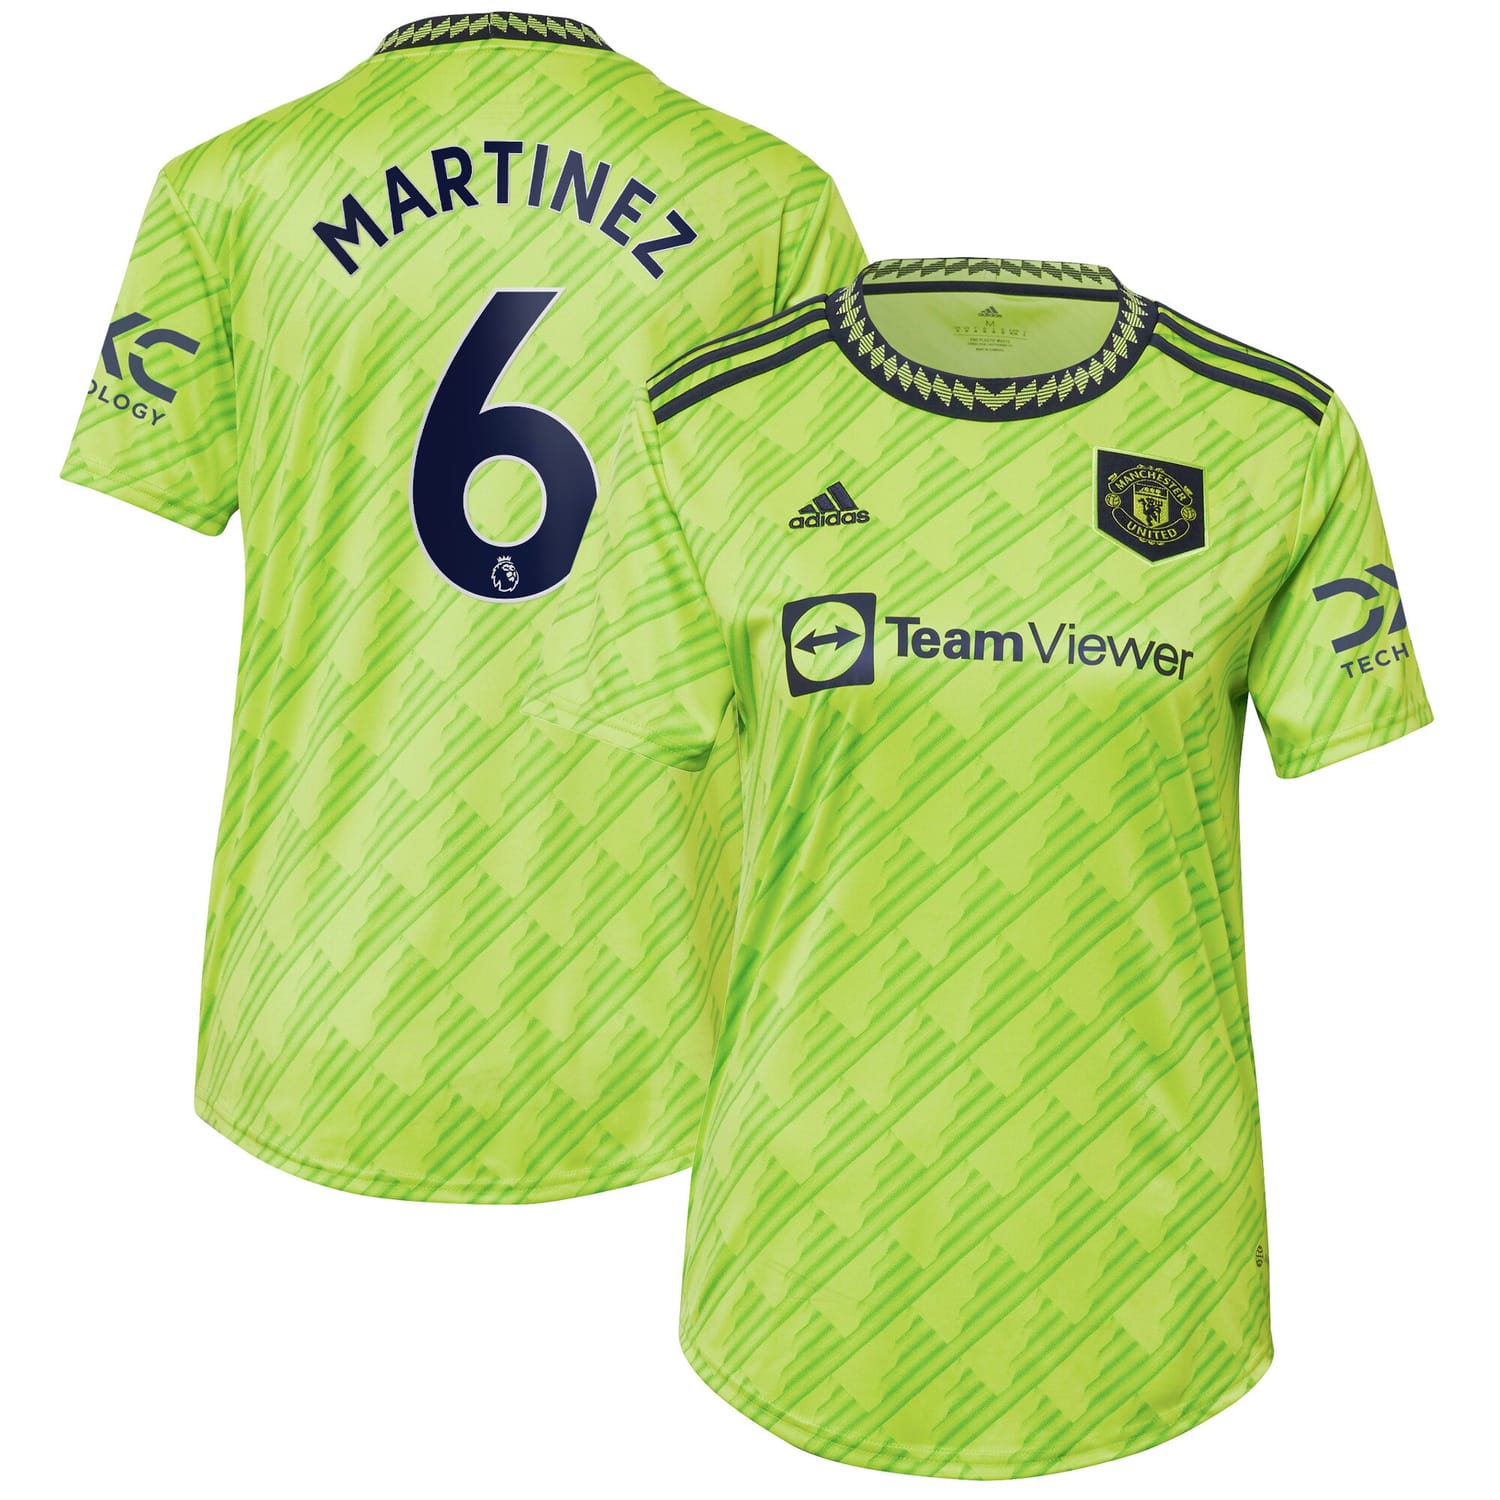 Premier League Manchester United Third Jersey Shirt Neon Green 2022-23 player Lisandro Martínez printing for Women